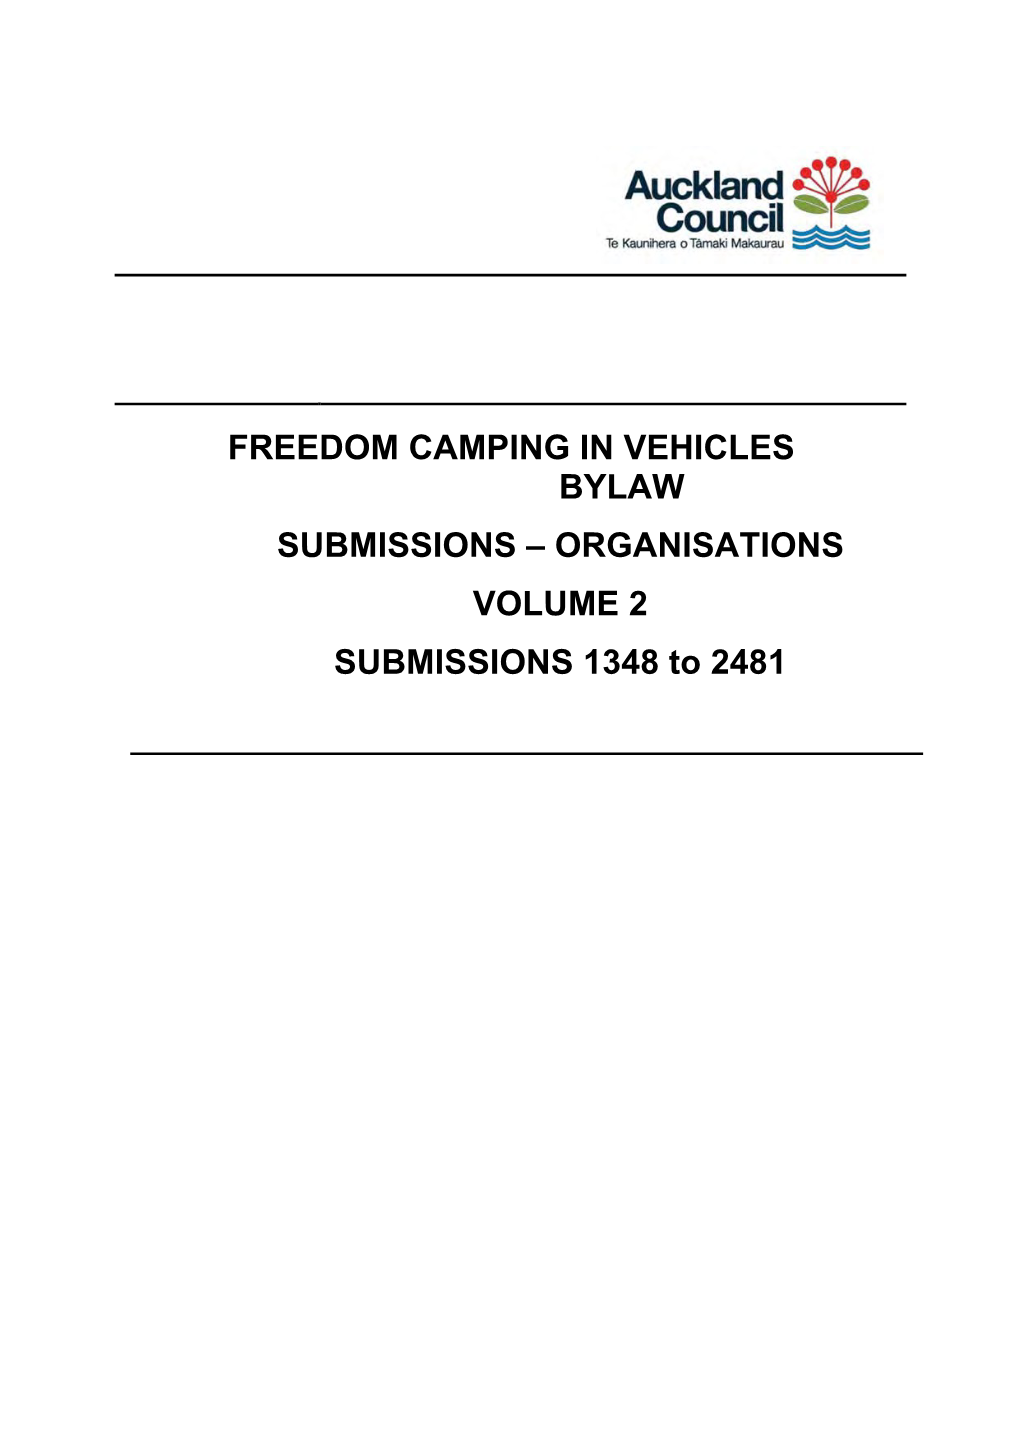 FREEDOM CAMPING in VEHICLES BYLAW SUBMISSIONS – ORGANISATIONS VOLUME 2 SUBMISSIONS 1348 to 2481 Sub No Organisation Firstname Surname Volume Page